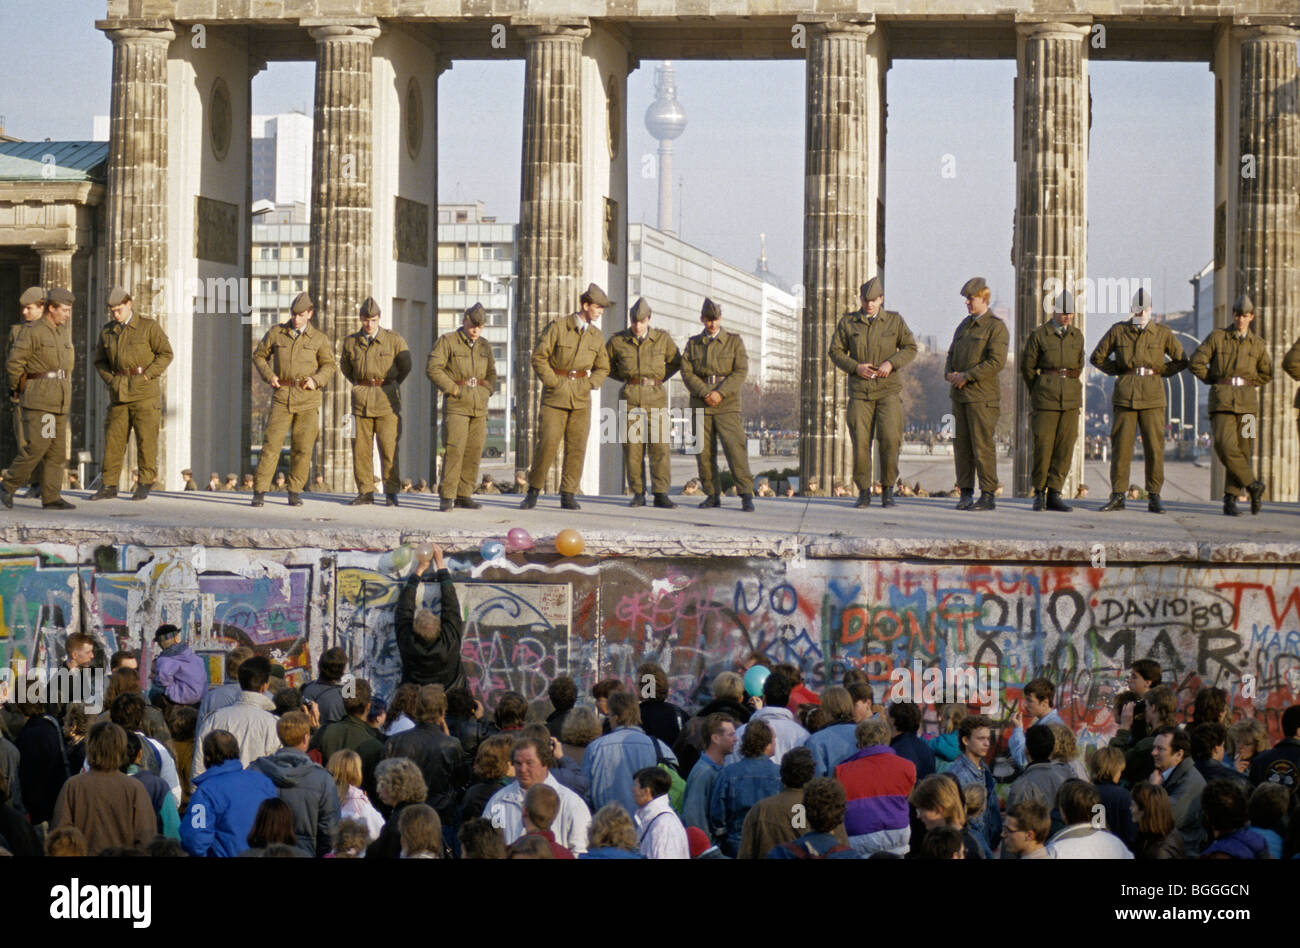 Fall of the Berlin Wall: Soldiers saving the wall at the Brandenburg Gate, Berlin, Germany Stock Photo